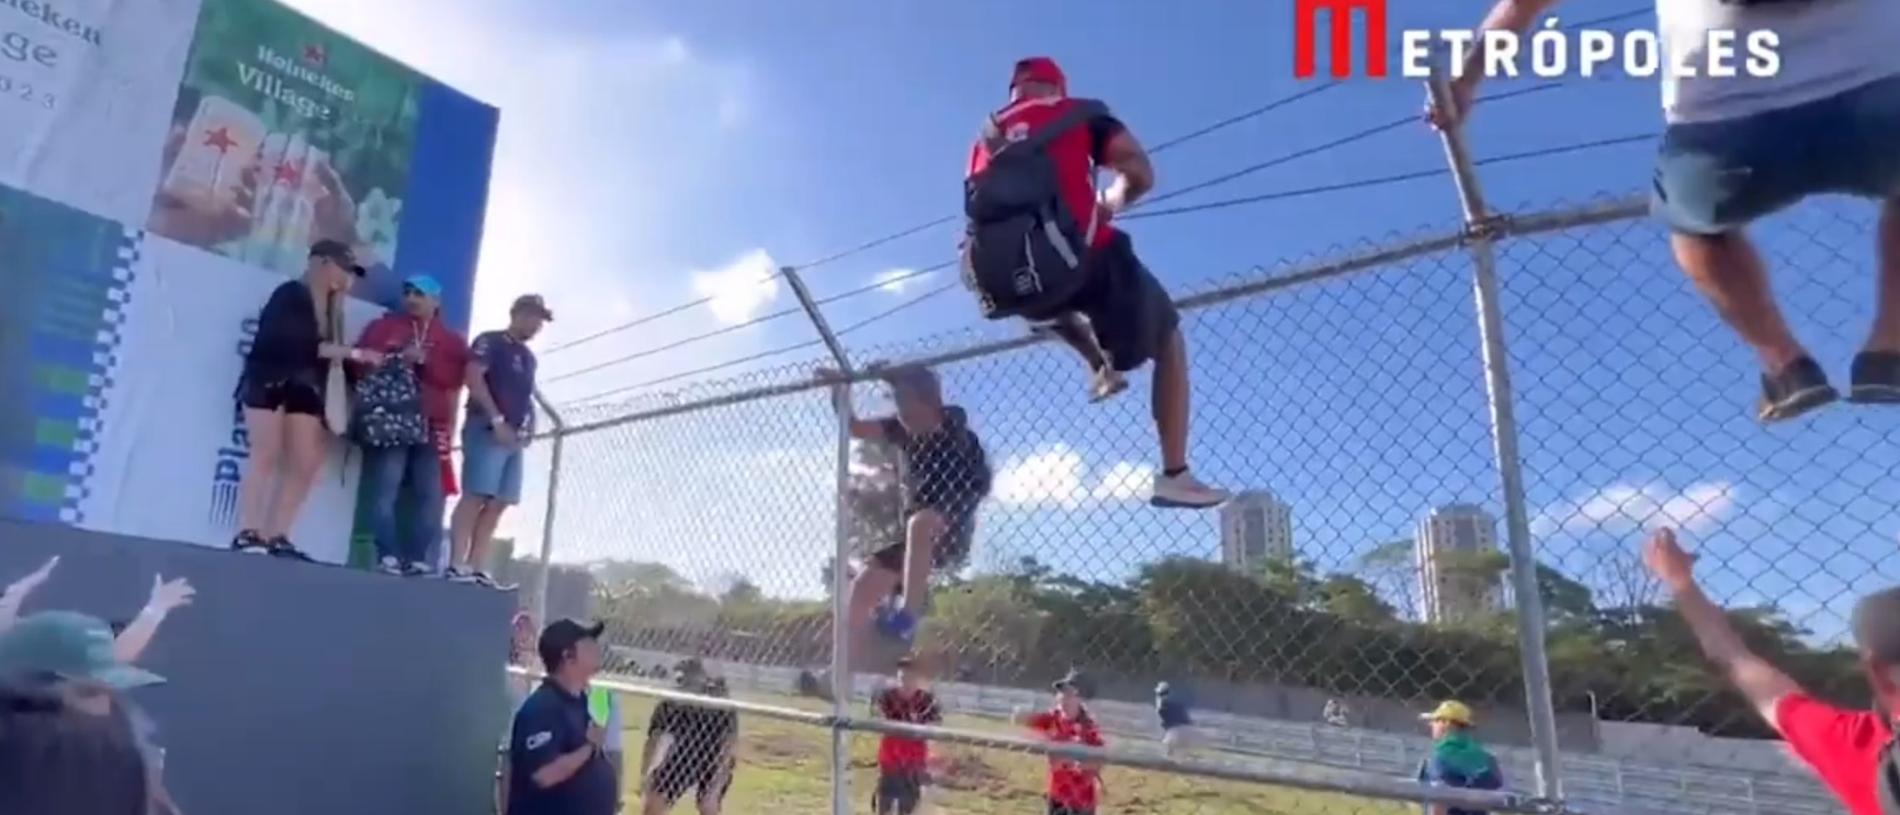 BROOOO THIS IS CHAOS”: F1 fans sent into a frenzy after crazy Brazilian Grand  Prix start